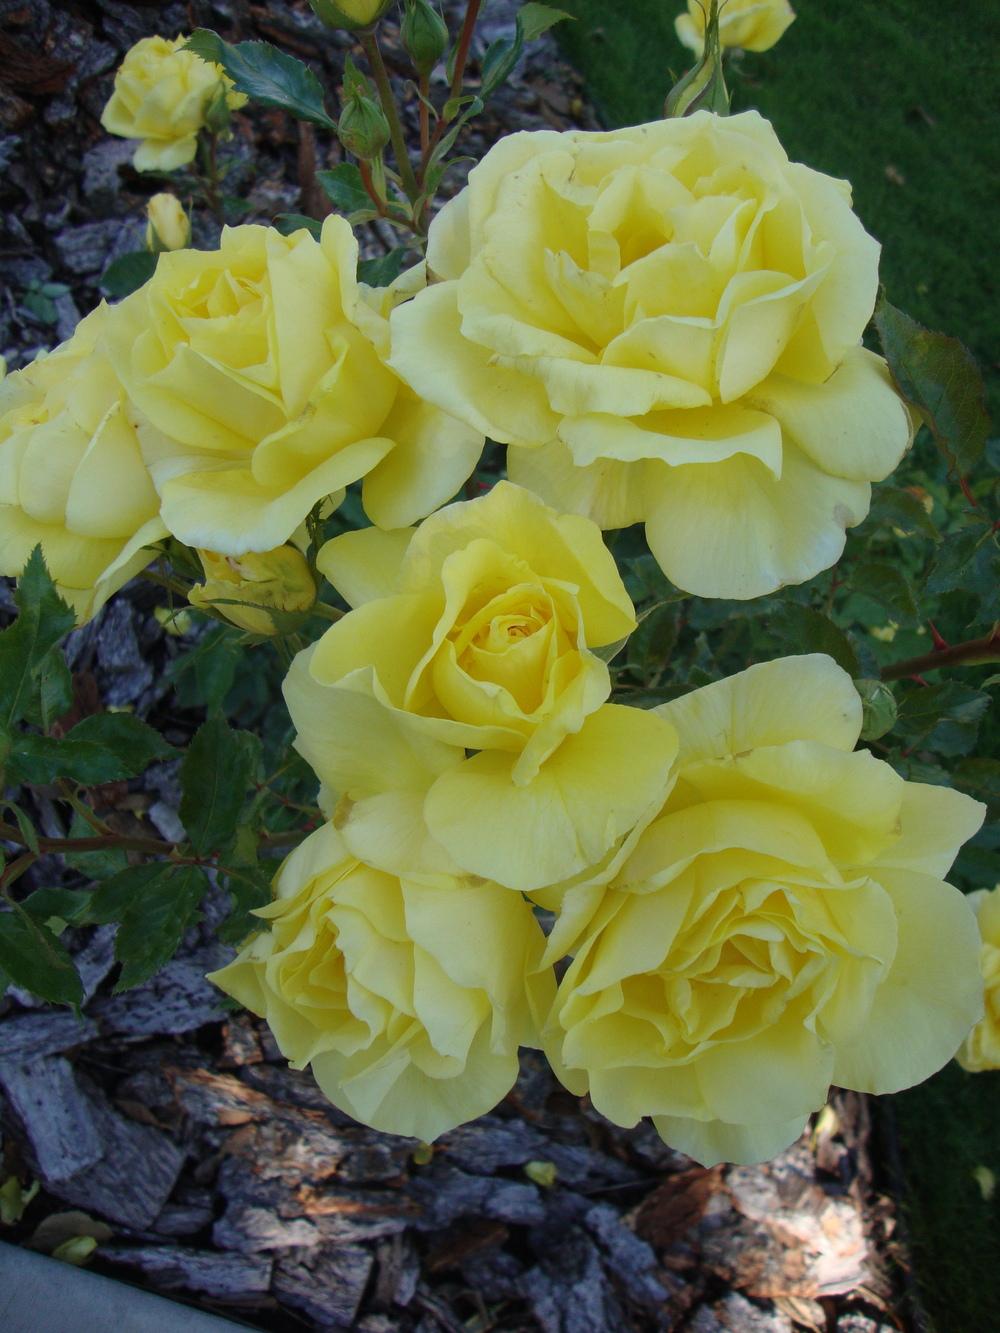 Photo of Roses (Rosa) uploaded by Paul2032